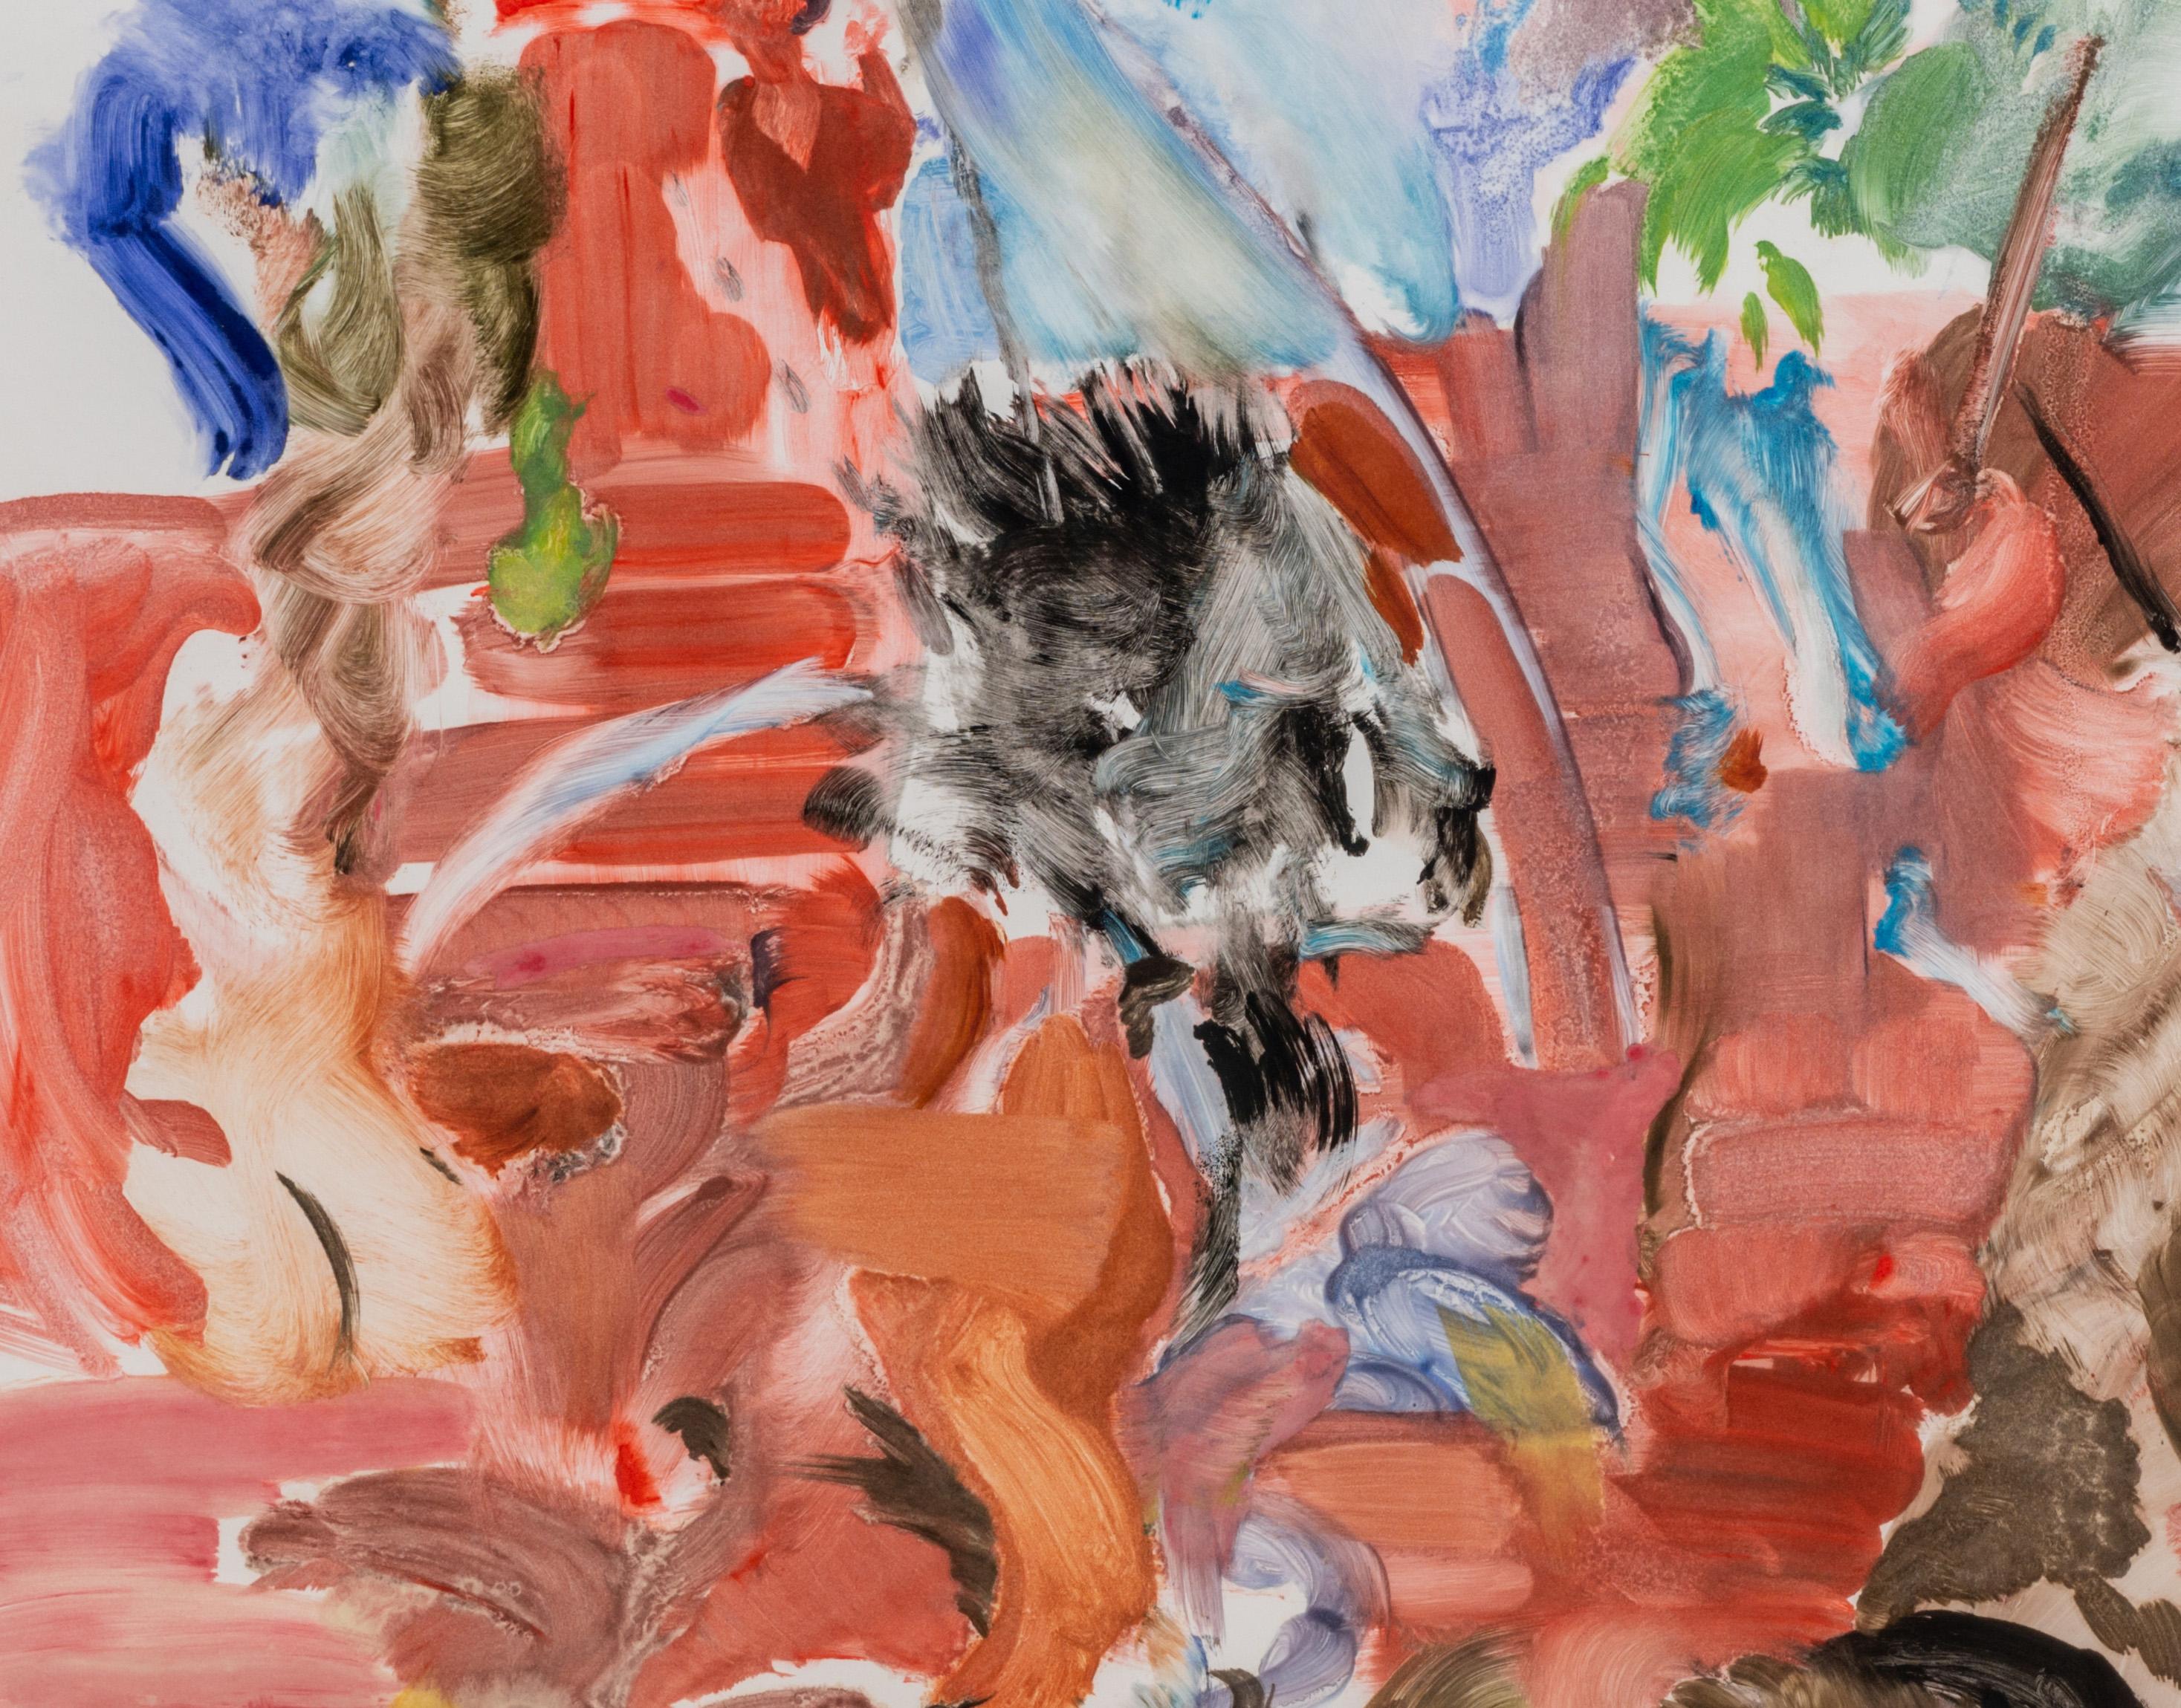 Cecily Brown is a contemporary British painter known for her Abstract Experessionist gestural style. Brown works with longtime printer Two Palms to make compositions that are similar to her paintings. The monotypes require Brown to work more